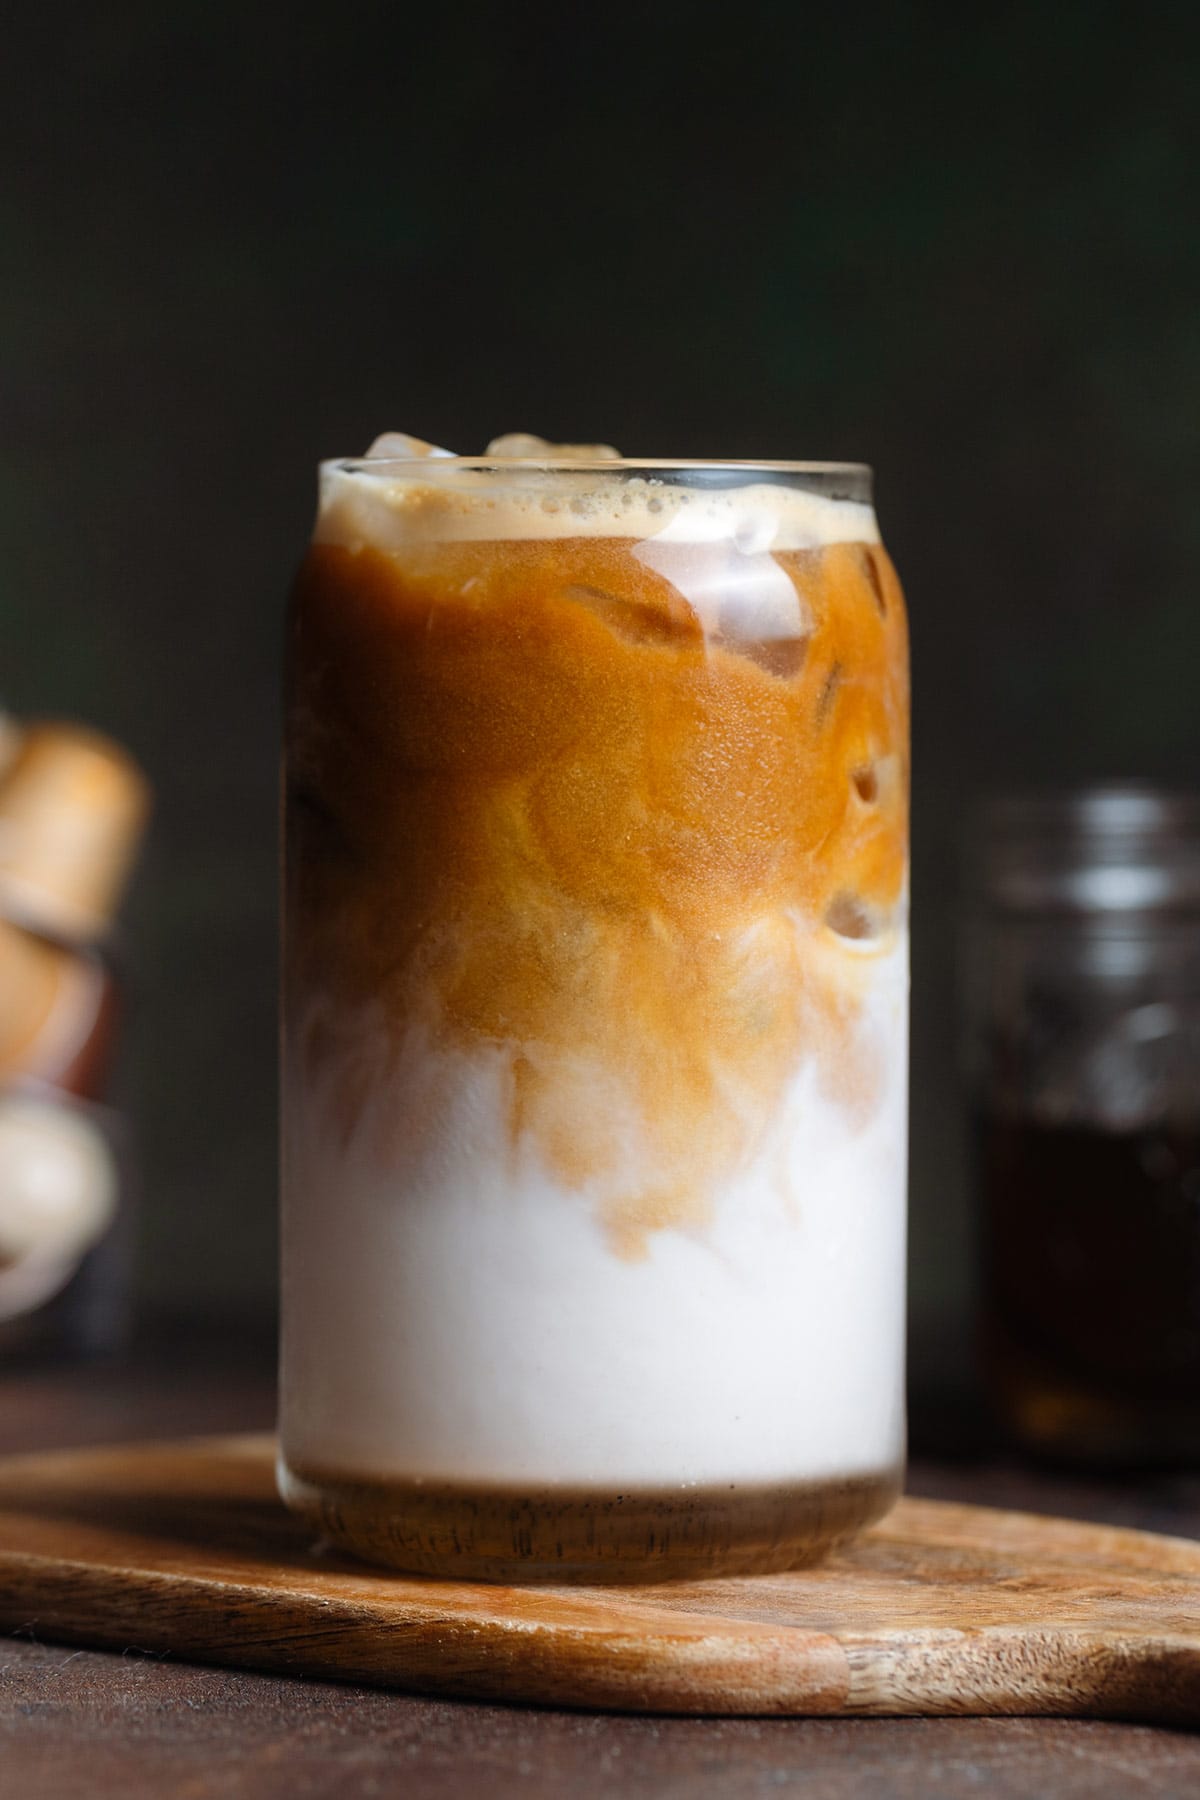 A tall can-shaped glass with iced vanilla latte with the coffee slowly mixing into the milk on a wooden background.